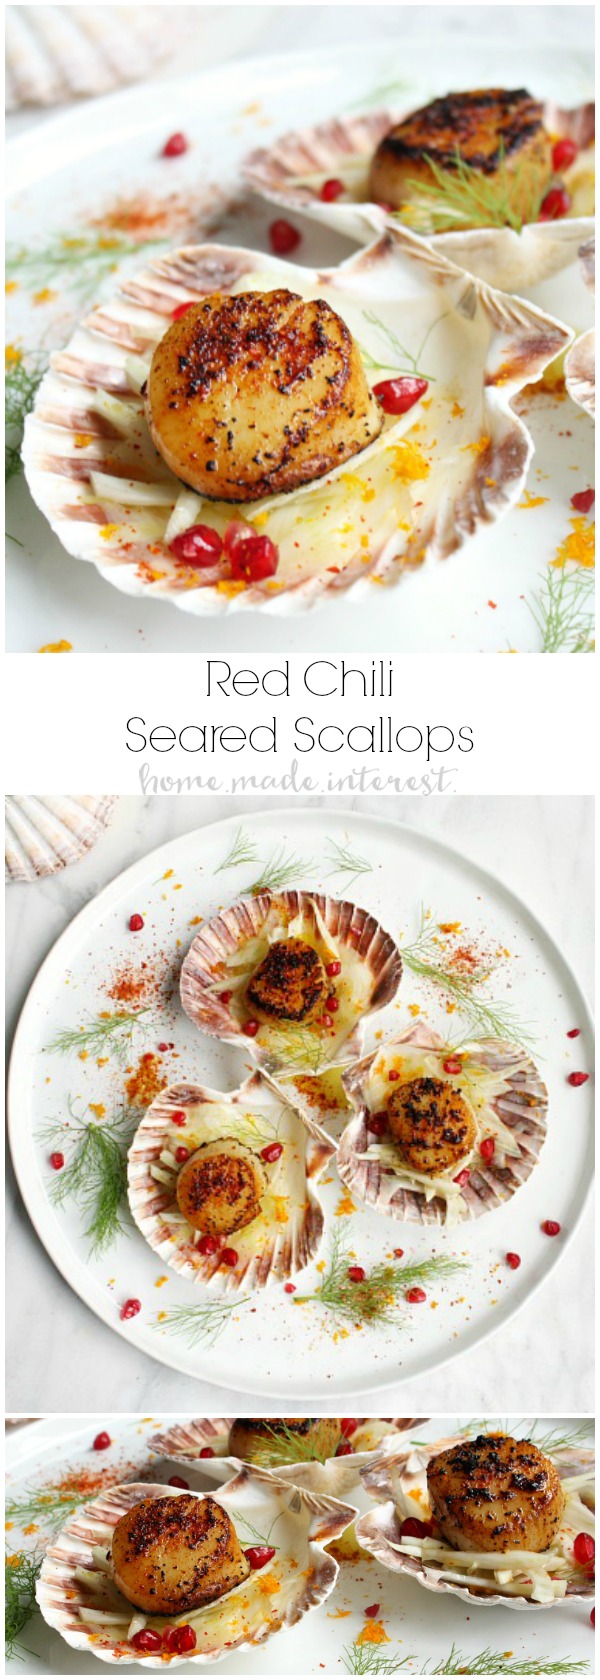 This Red Chili Seared Scallops recipe is an an elegant appetizer recipe that will make a great addition to your New Year’s Eve holiday appetizers. The scallops are coated in Basque Red Chili Powder for a warm sweet flavor that pairs perfectly with the fresh Citrus Fennel Salad it is served on. It’s an easy seafood appetizer recipe is sure to impress your friends and family with its beauty and simplicity.